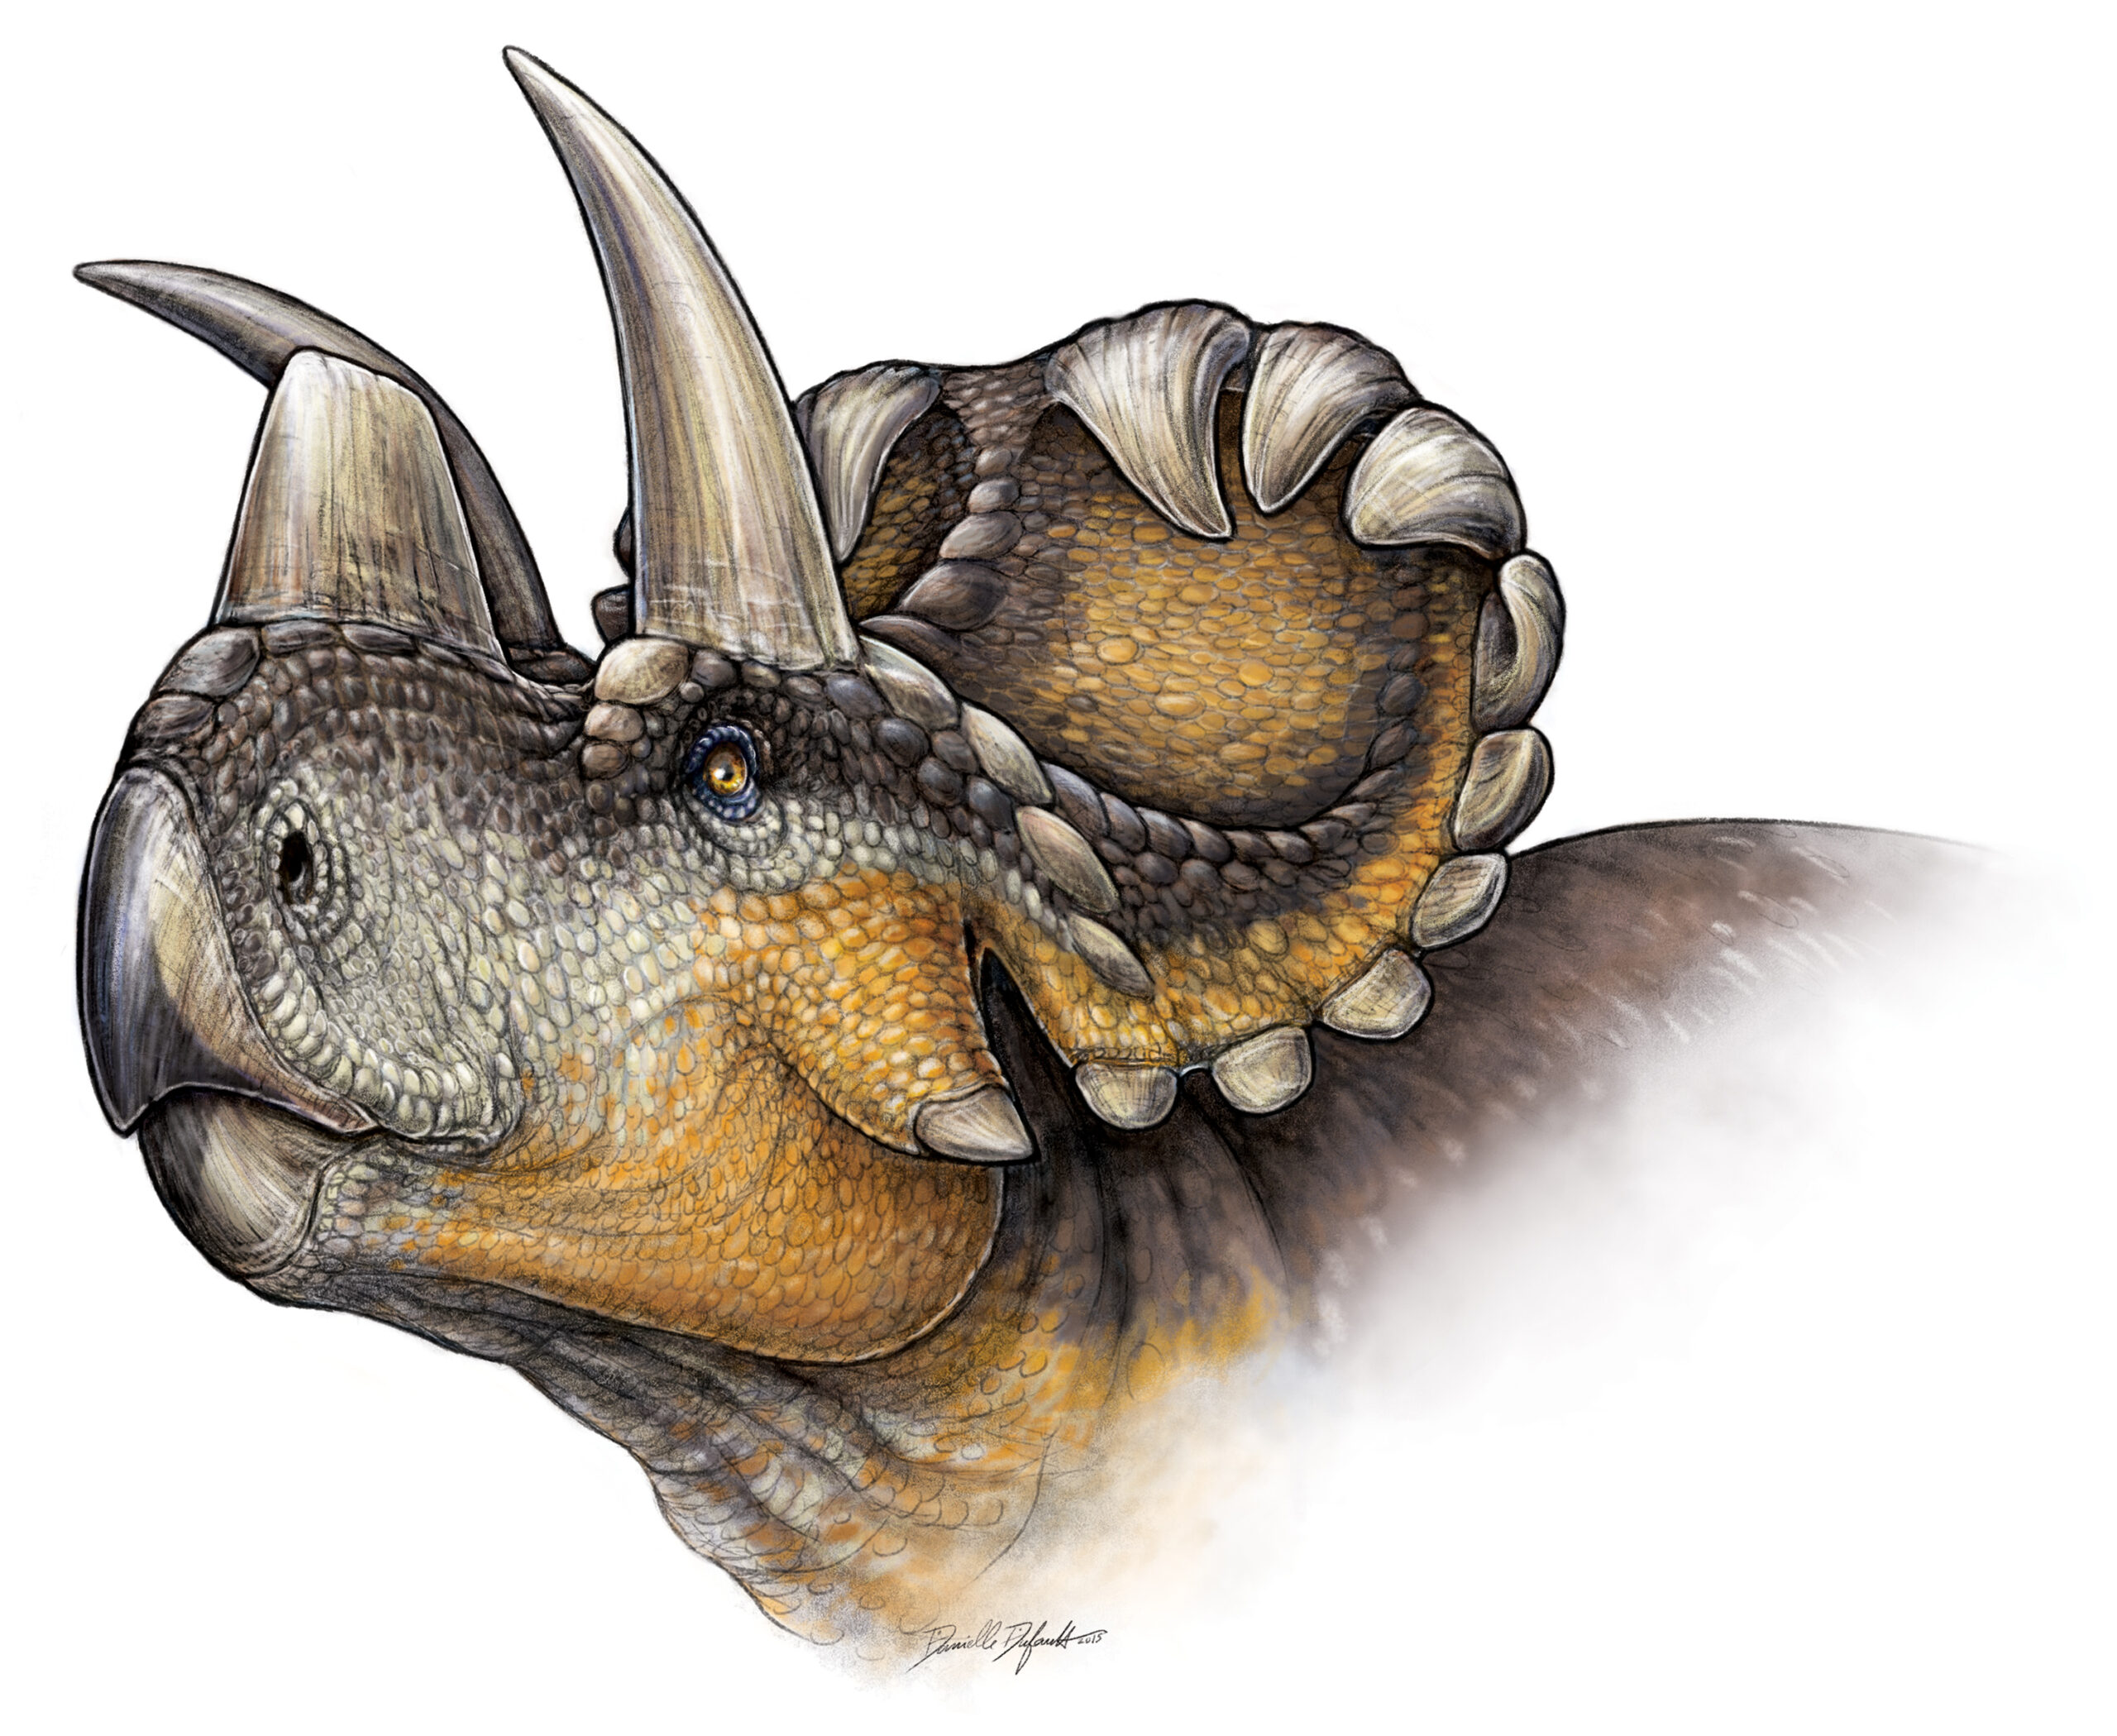 New Triceratops Relative Discovered, Named ‘Wendy’